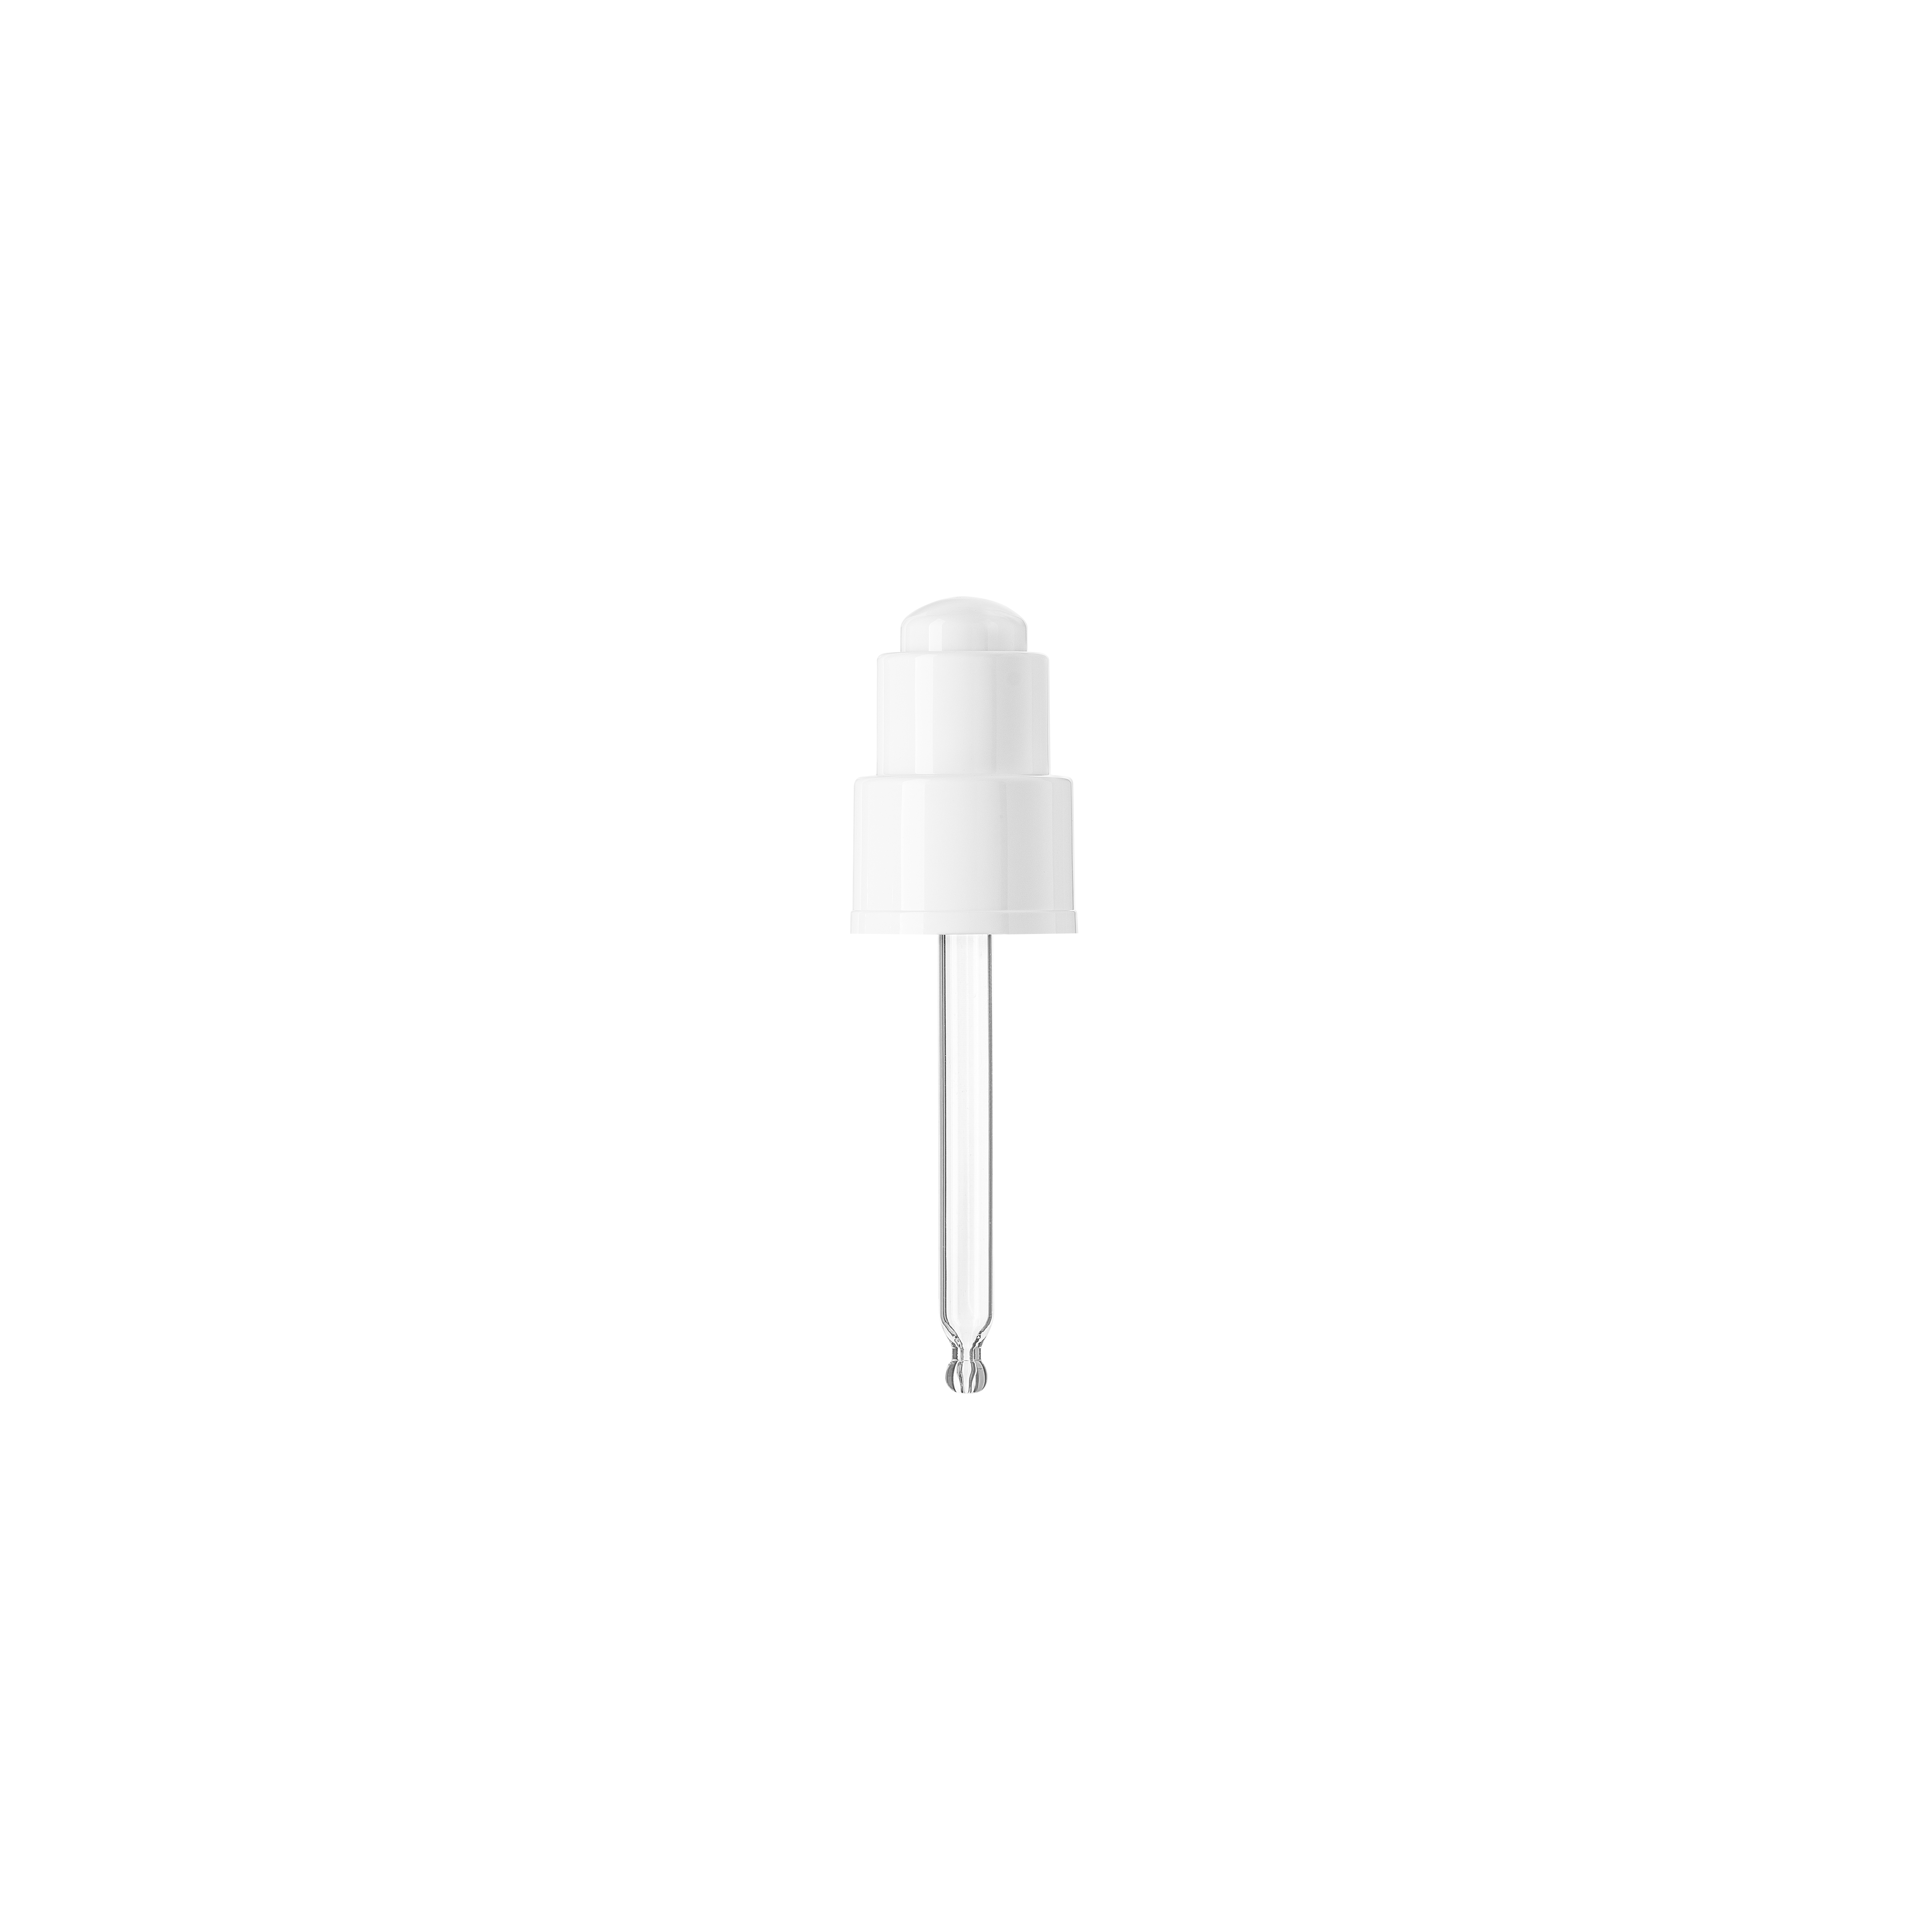 Push-button pipette 24/410, PP/ABS, white glossy finish, white button bulb Nitrile 0.4 ml, ball tip, straight for Laurel 50 ml